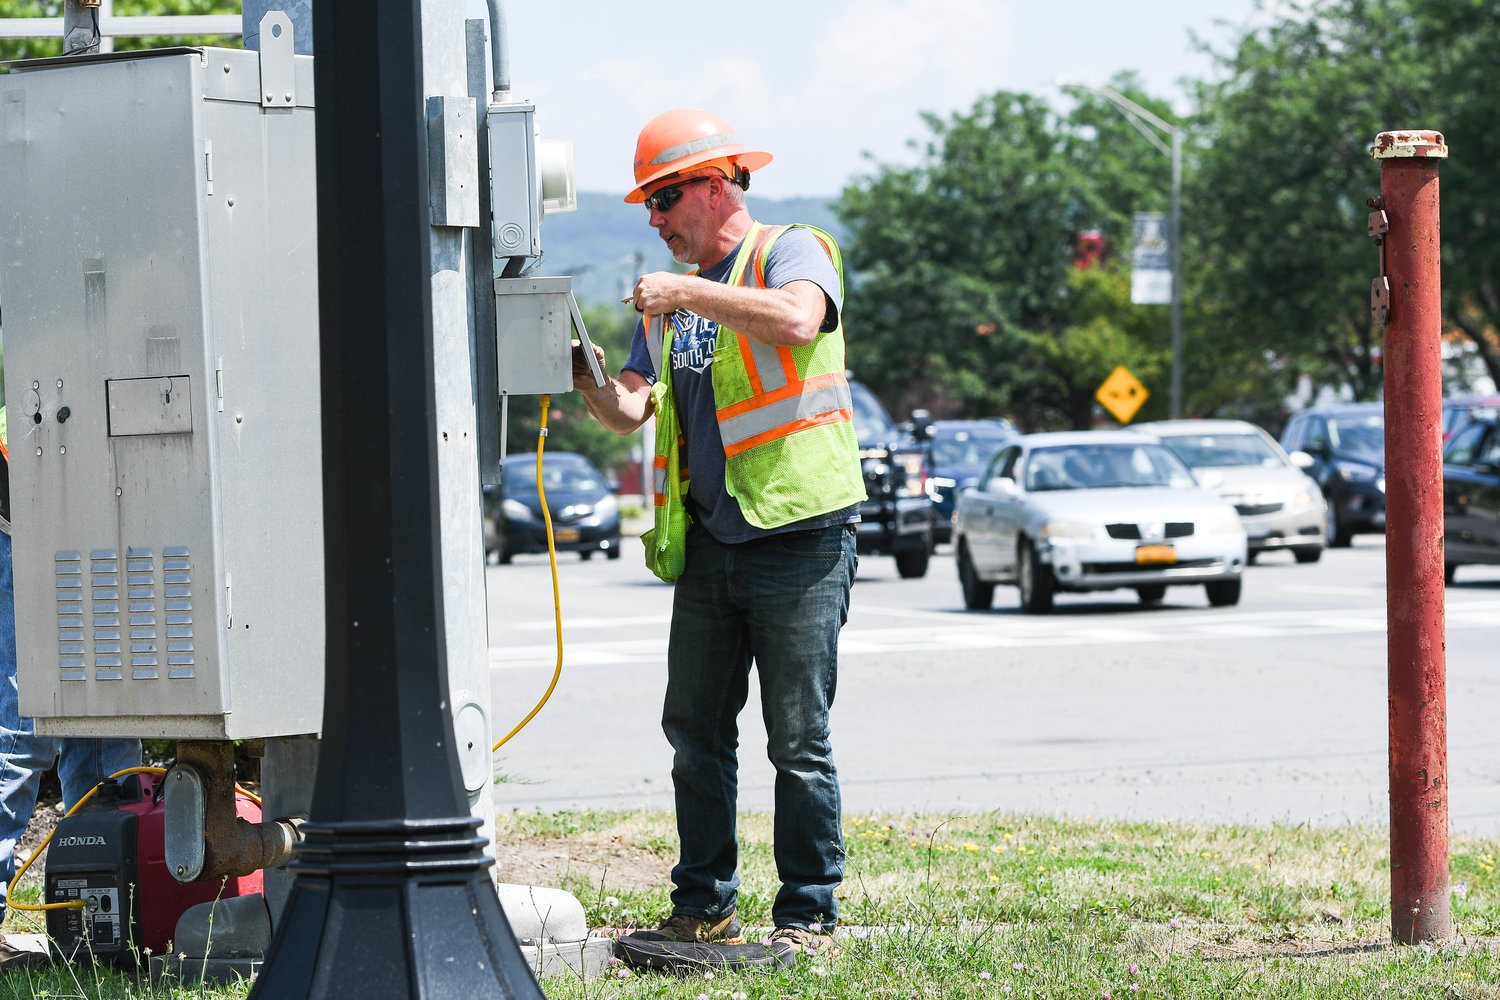 A Department of Transportation worker plugs in a generator to fix a traffic light on the corner of North Genesee Street. and Wurz Avenue in Utica after a power outage on Friday shut down several street lights. National Grid said nearly 600 customers were without power for about an hour.